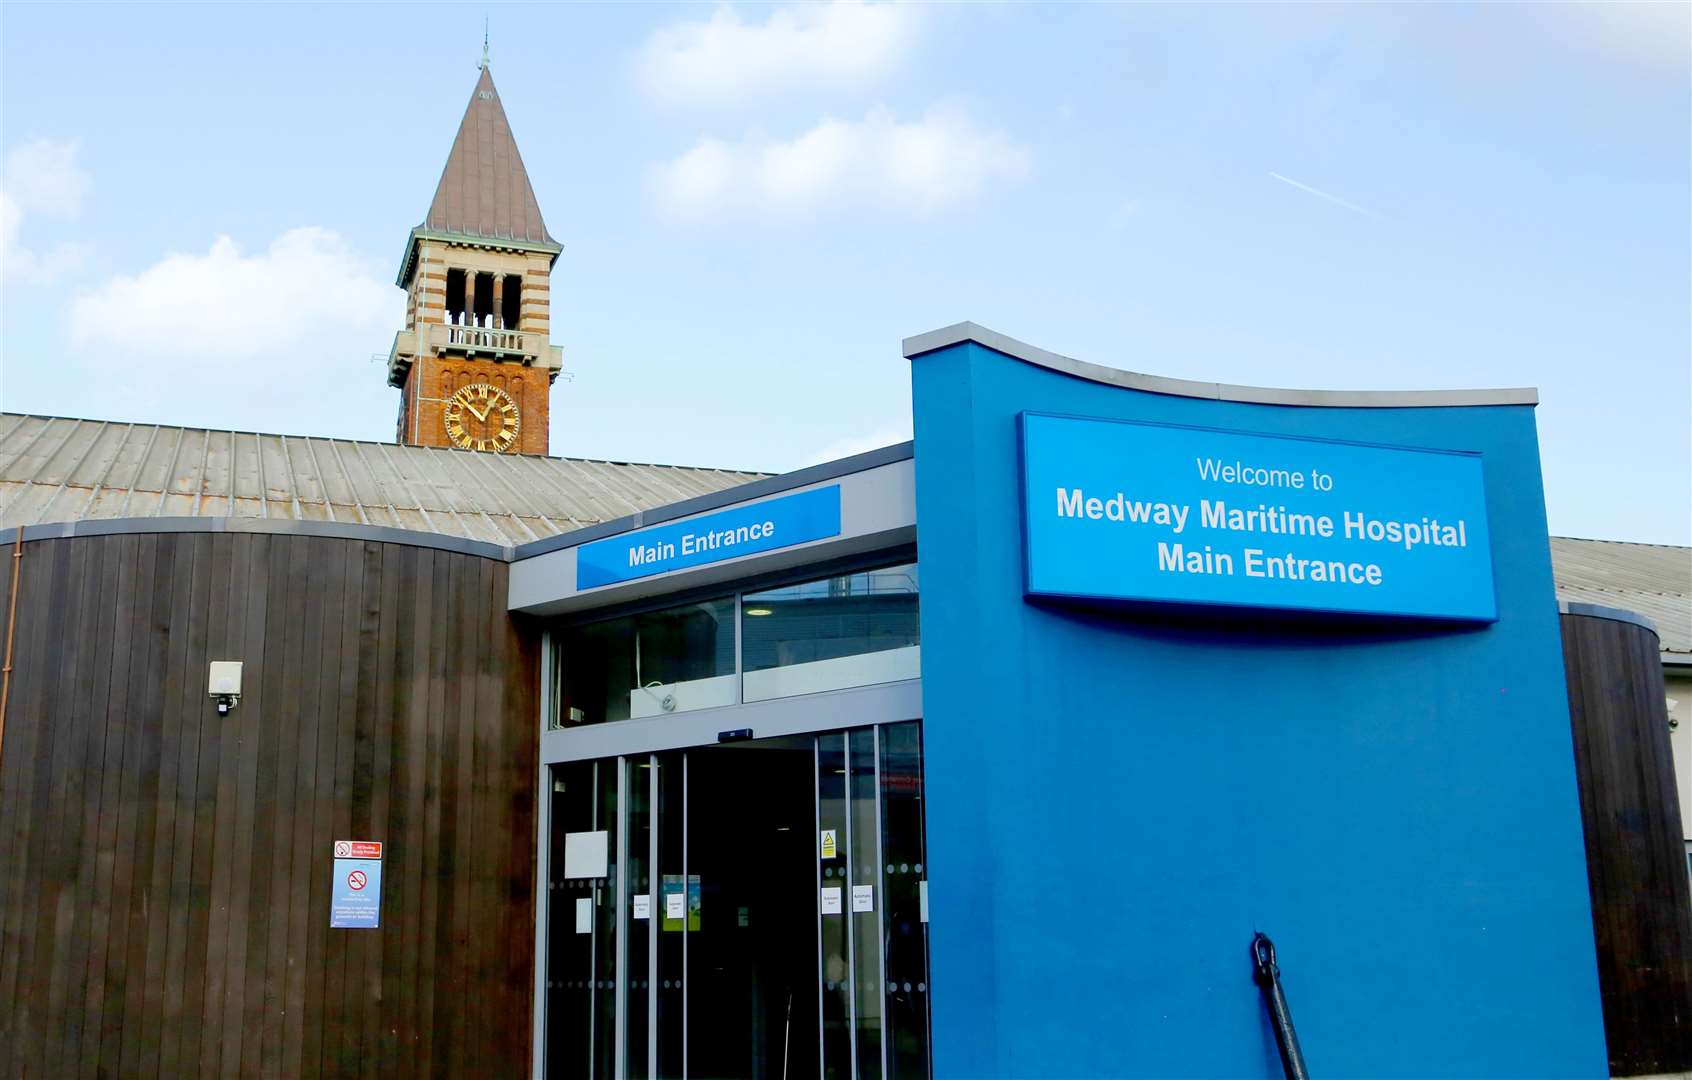 Medway Maritime Hospital recorded a fall in the number of breastfeeding mothers